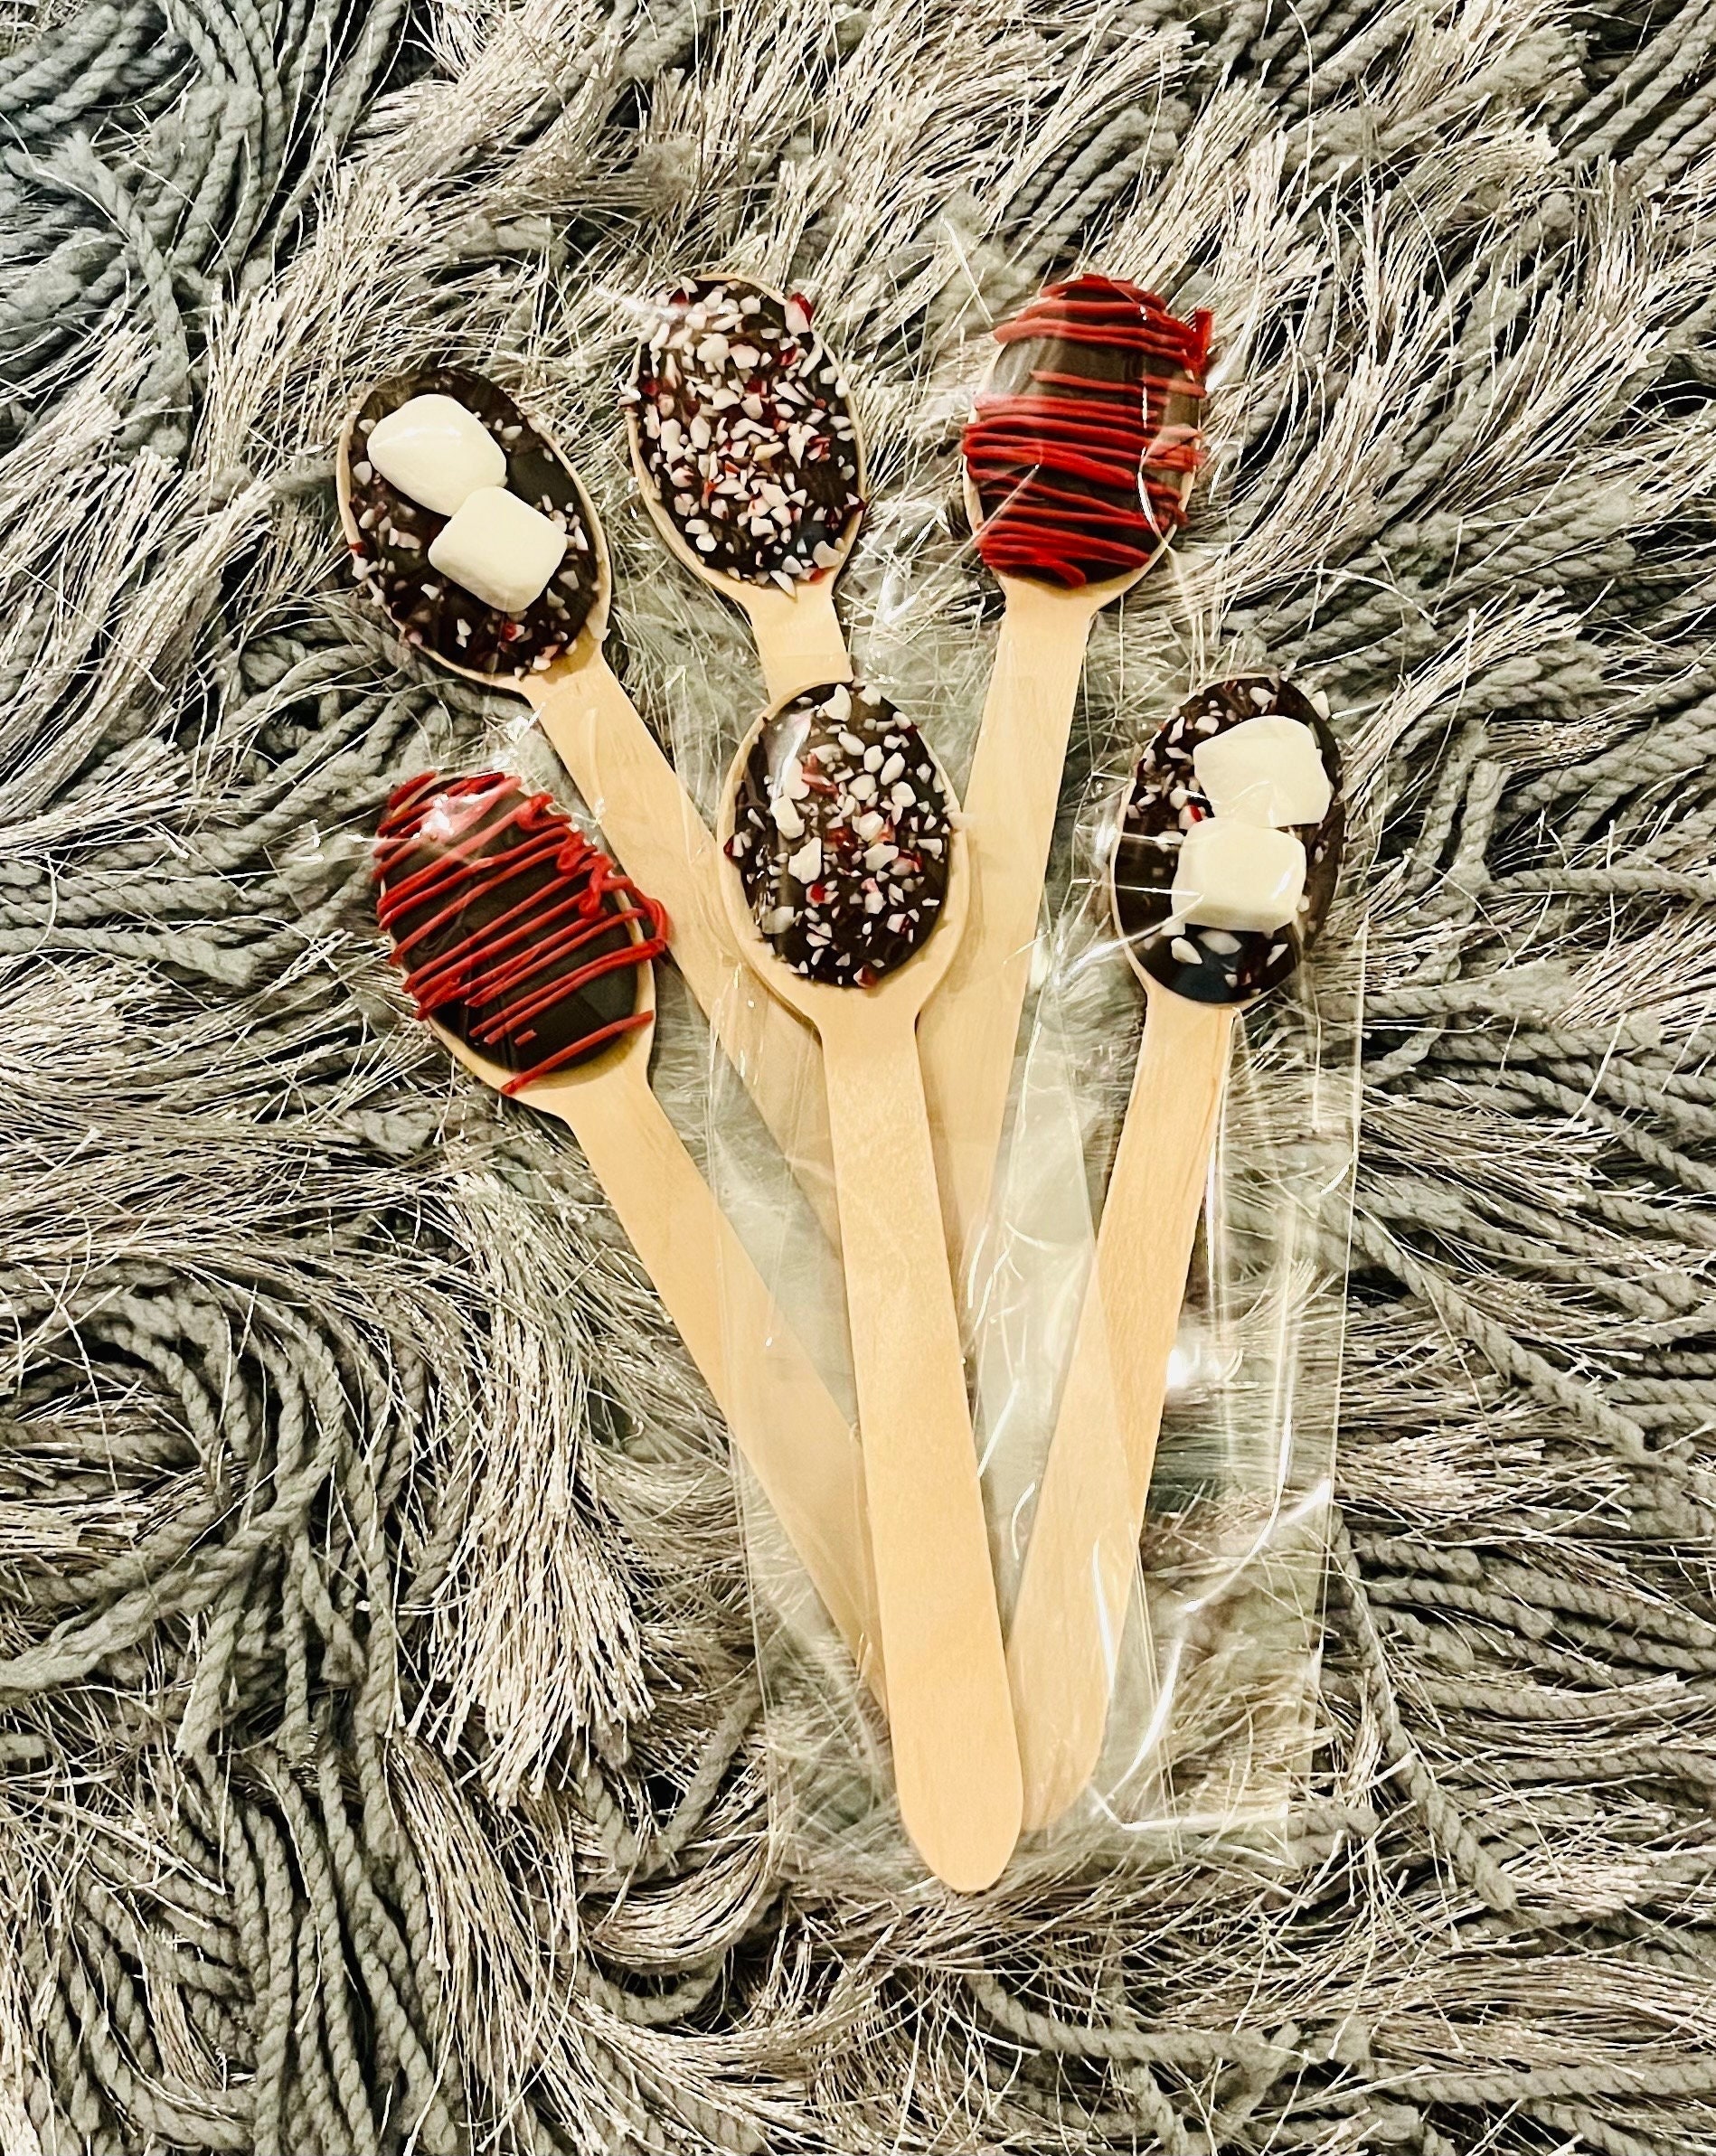 Hot Chocolate Stirrers with Marshmallow, Edible Milk and Dark Chocolate  Spoons, Individually Wrapped and Update Version Made with Belgium  Chocolate, 3